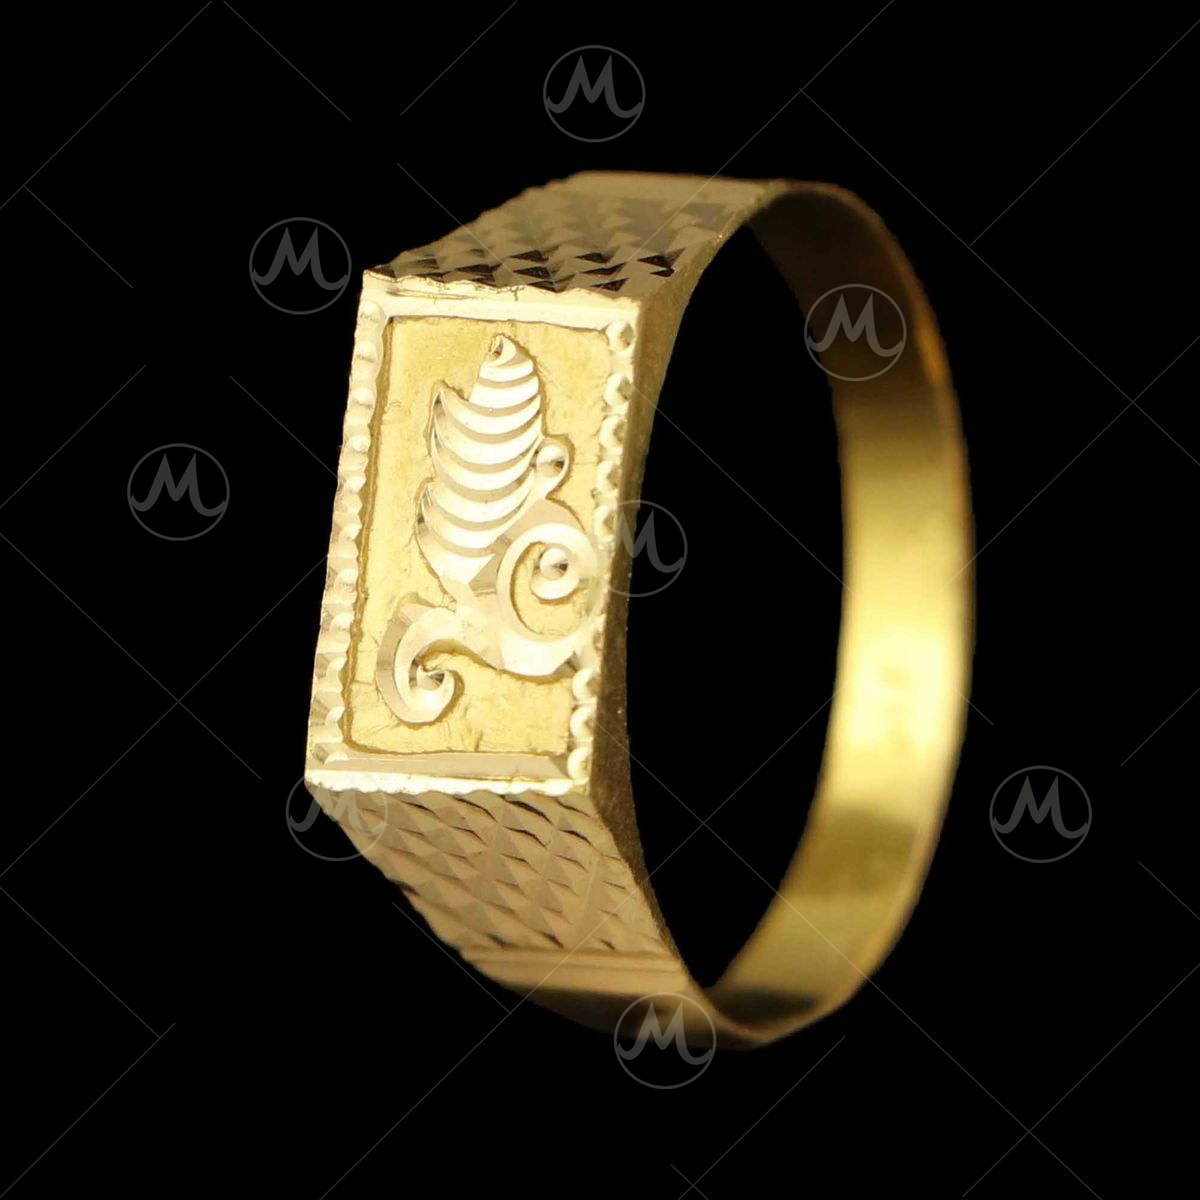 Aurelia articulated band ring in 18k gold and diamonds - LALAoUNIS®